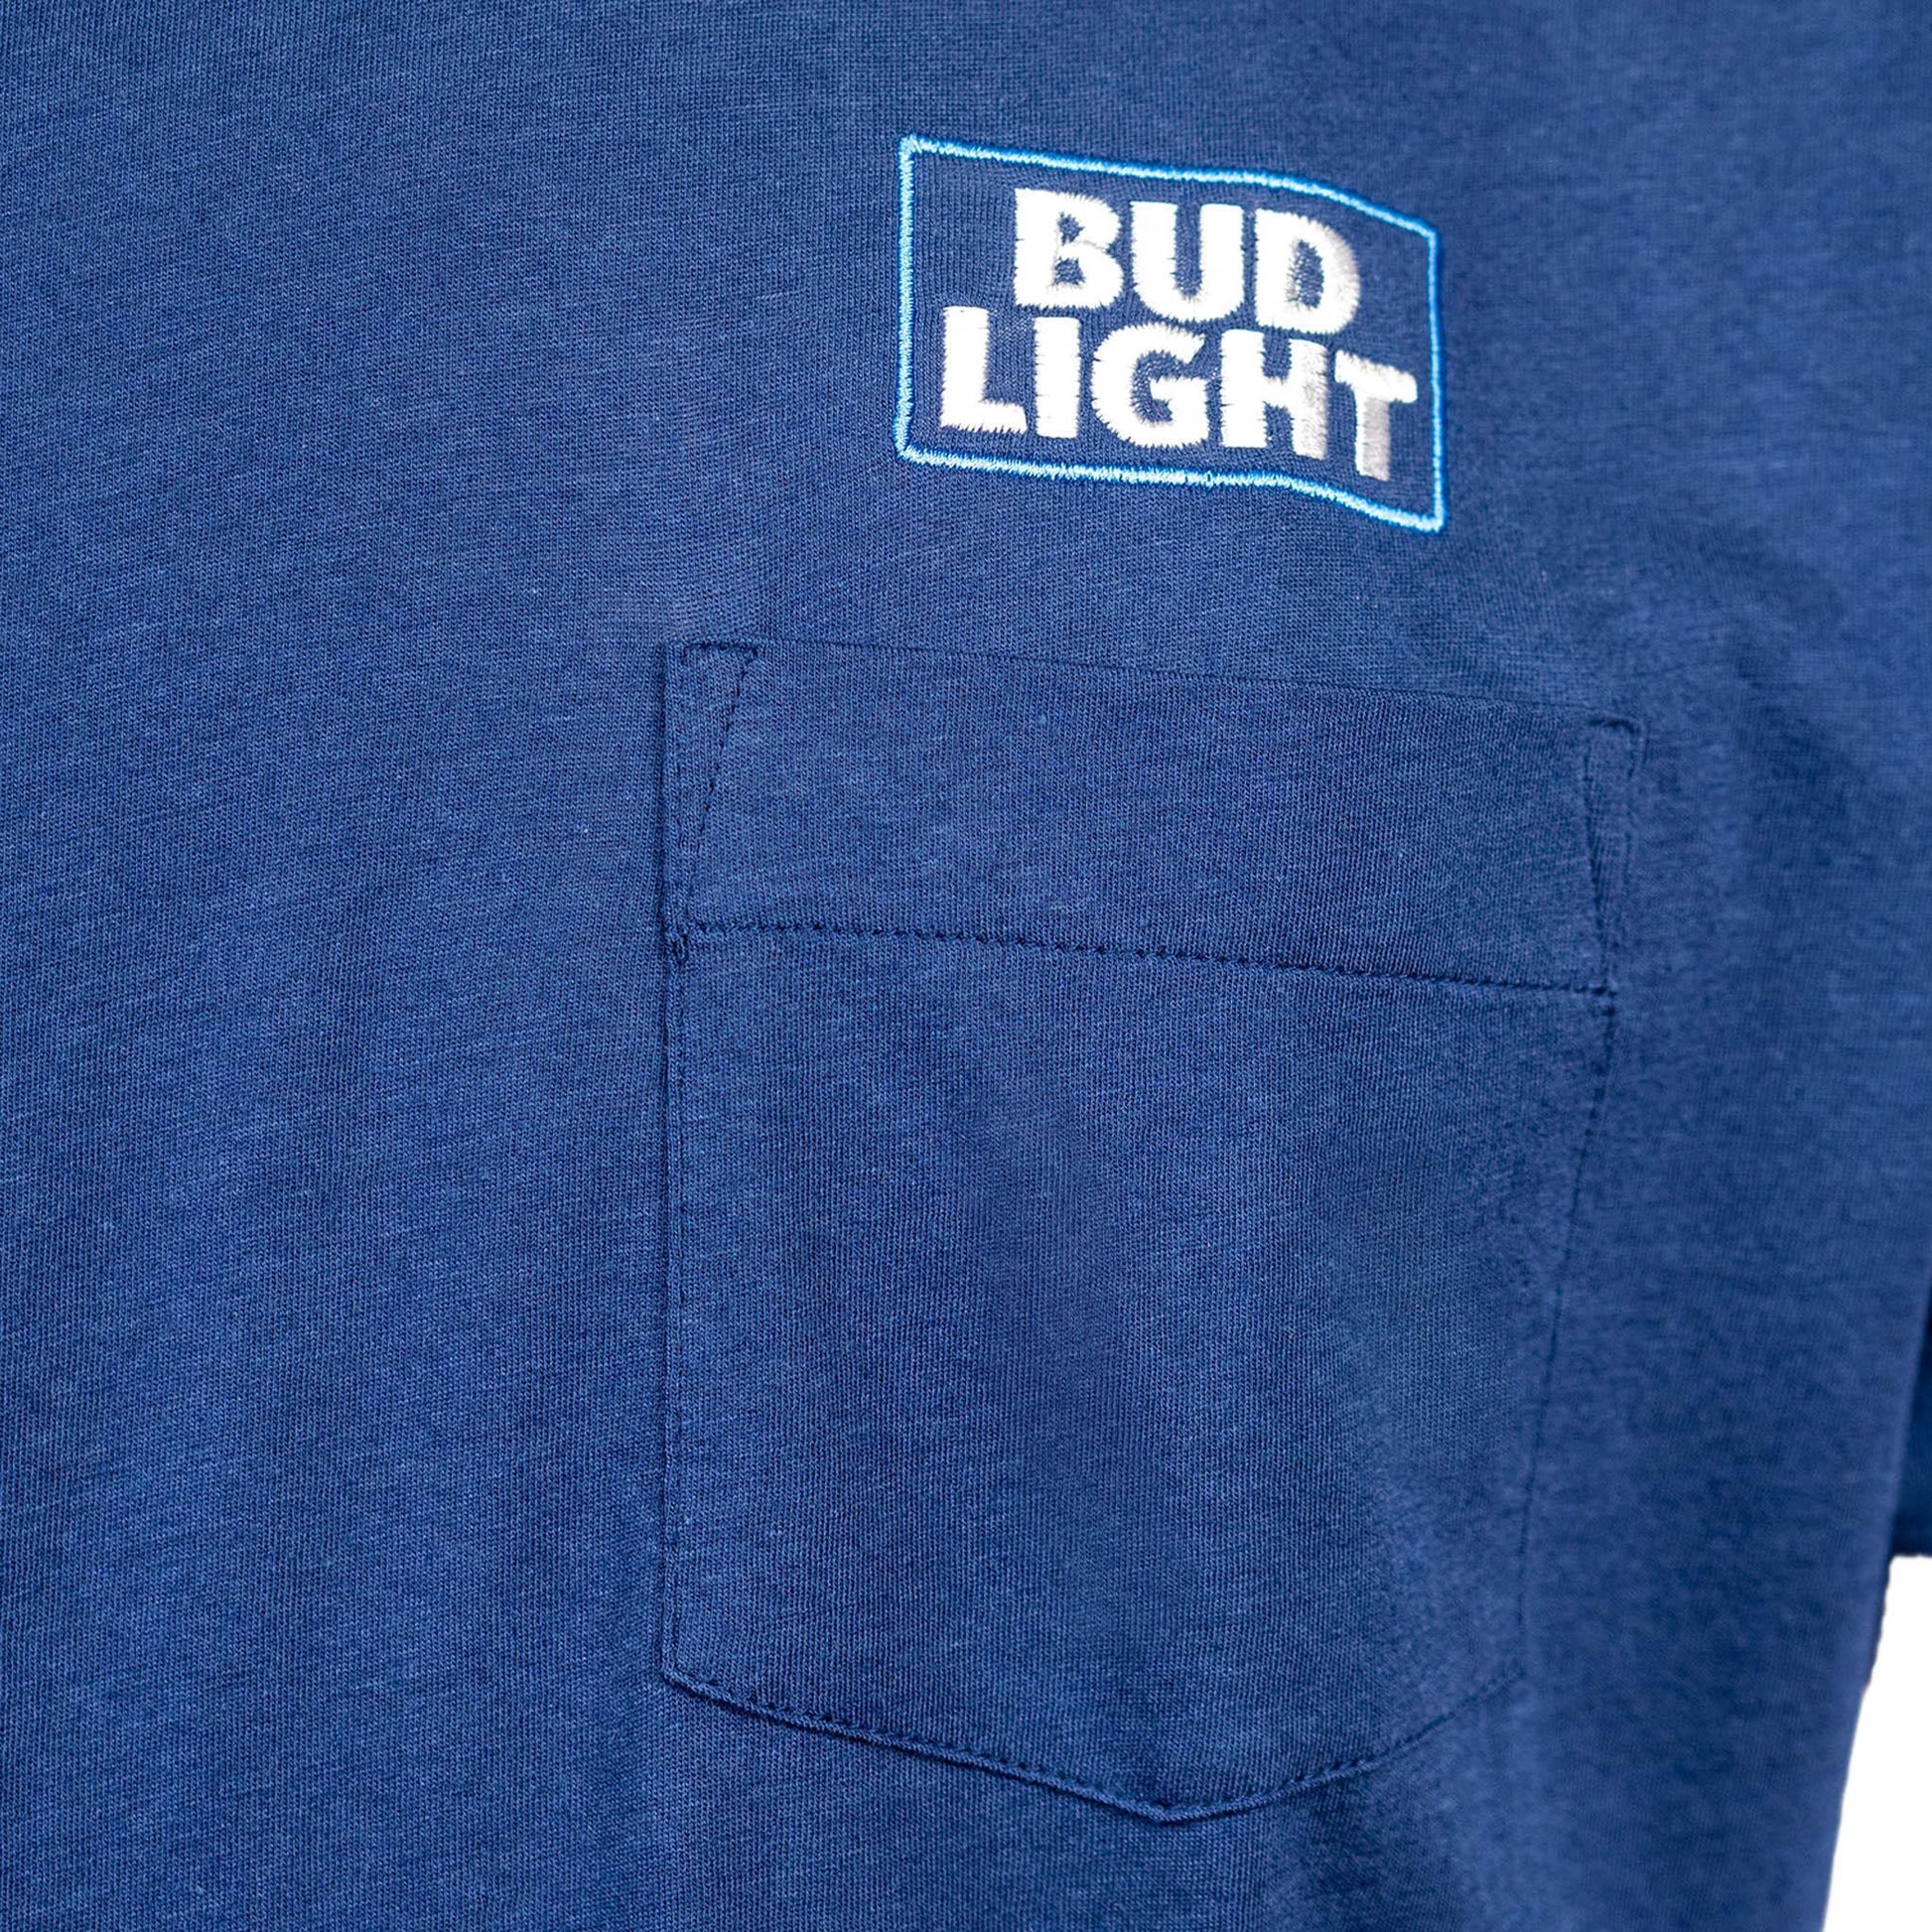 Close up of embroidered Bud Light logo